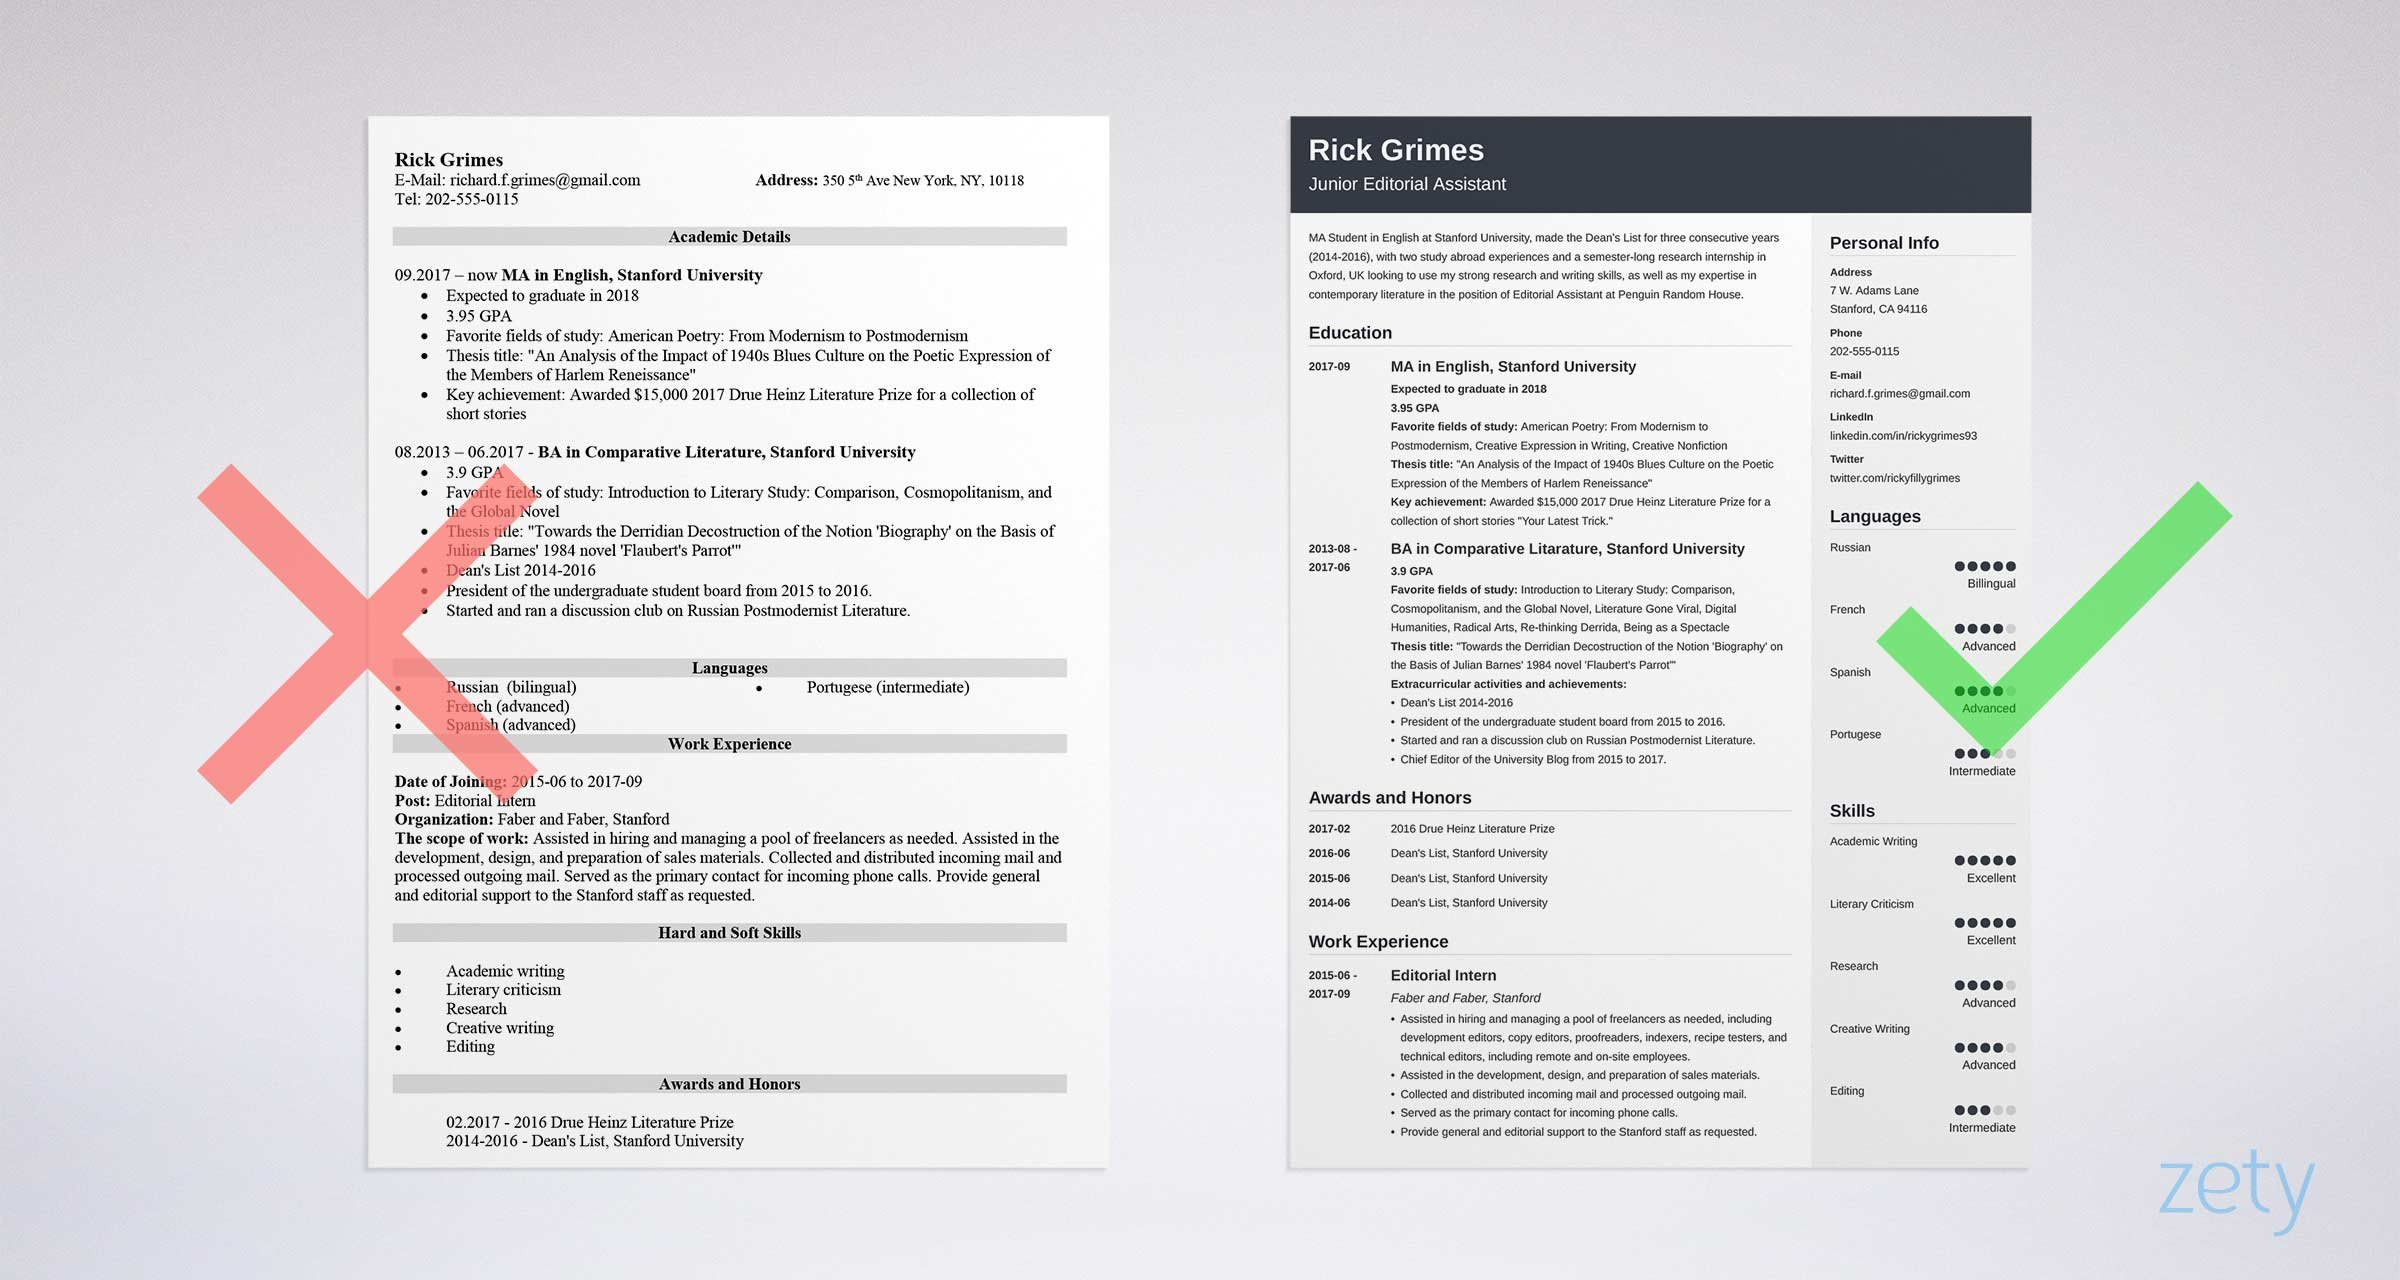 Basic Resume Samples for College Students 20lancarrezekiq Student Resume Examples & Templates for All Students